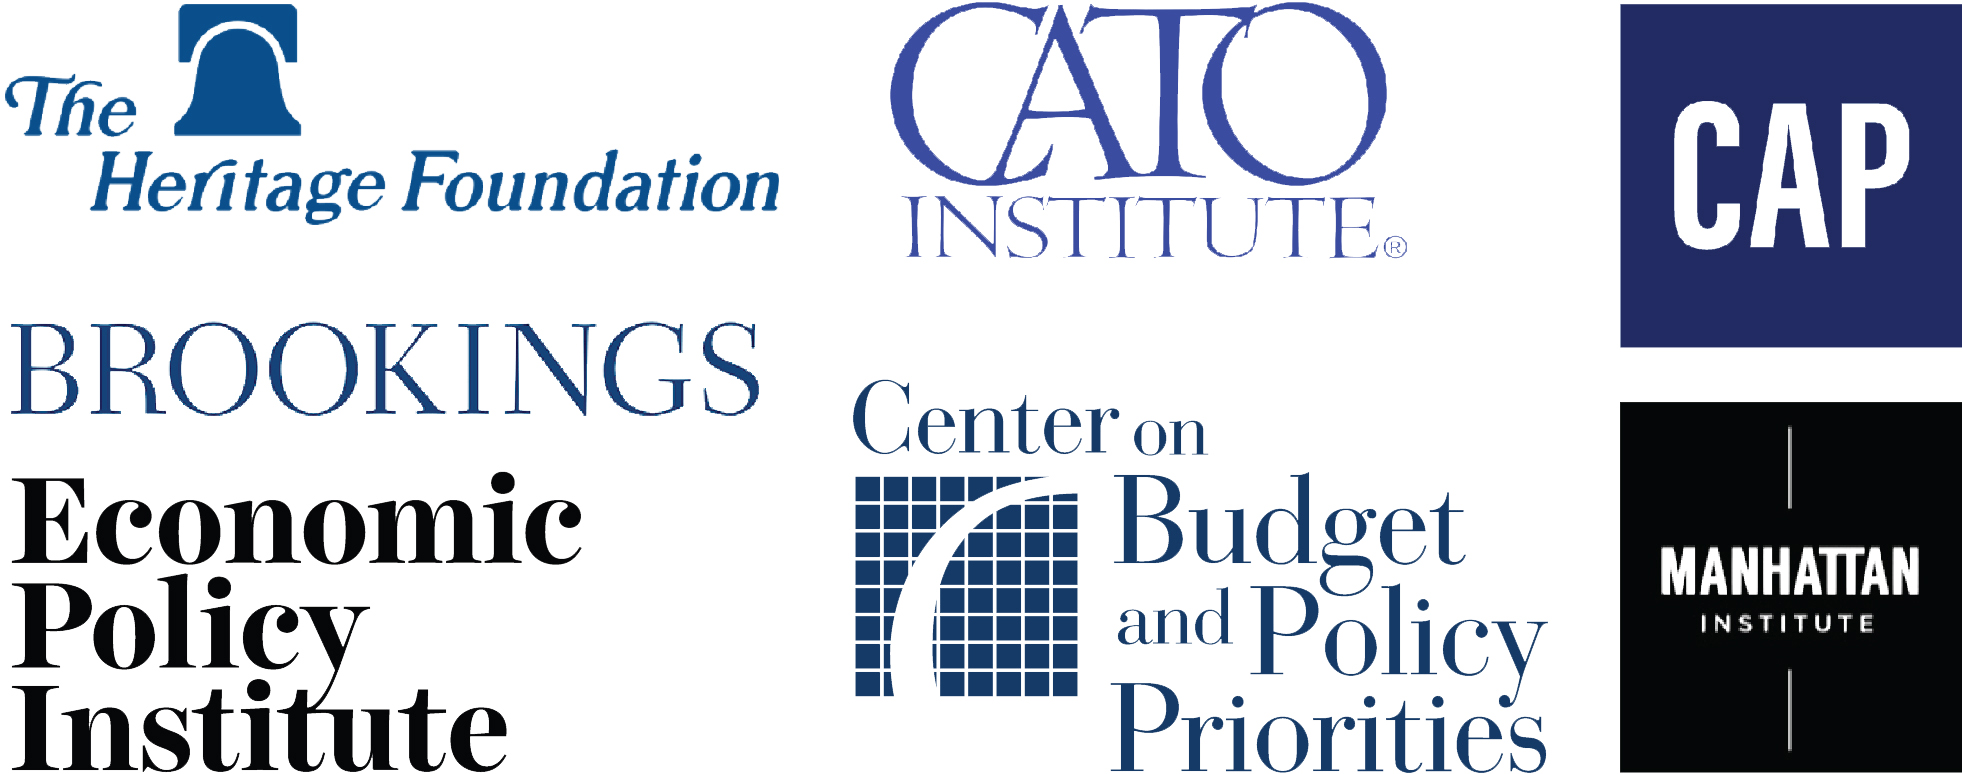 Collage of logos from think tanks: Heritage Foundation, Manhattan Institute, Cato Institute, Brookings Institution, Center for American Progress, Center of Budget and Policy Priorities, and Economic Policy Institute.